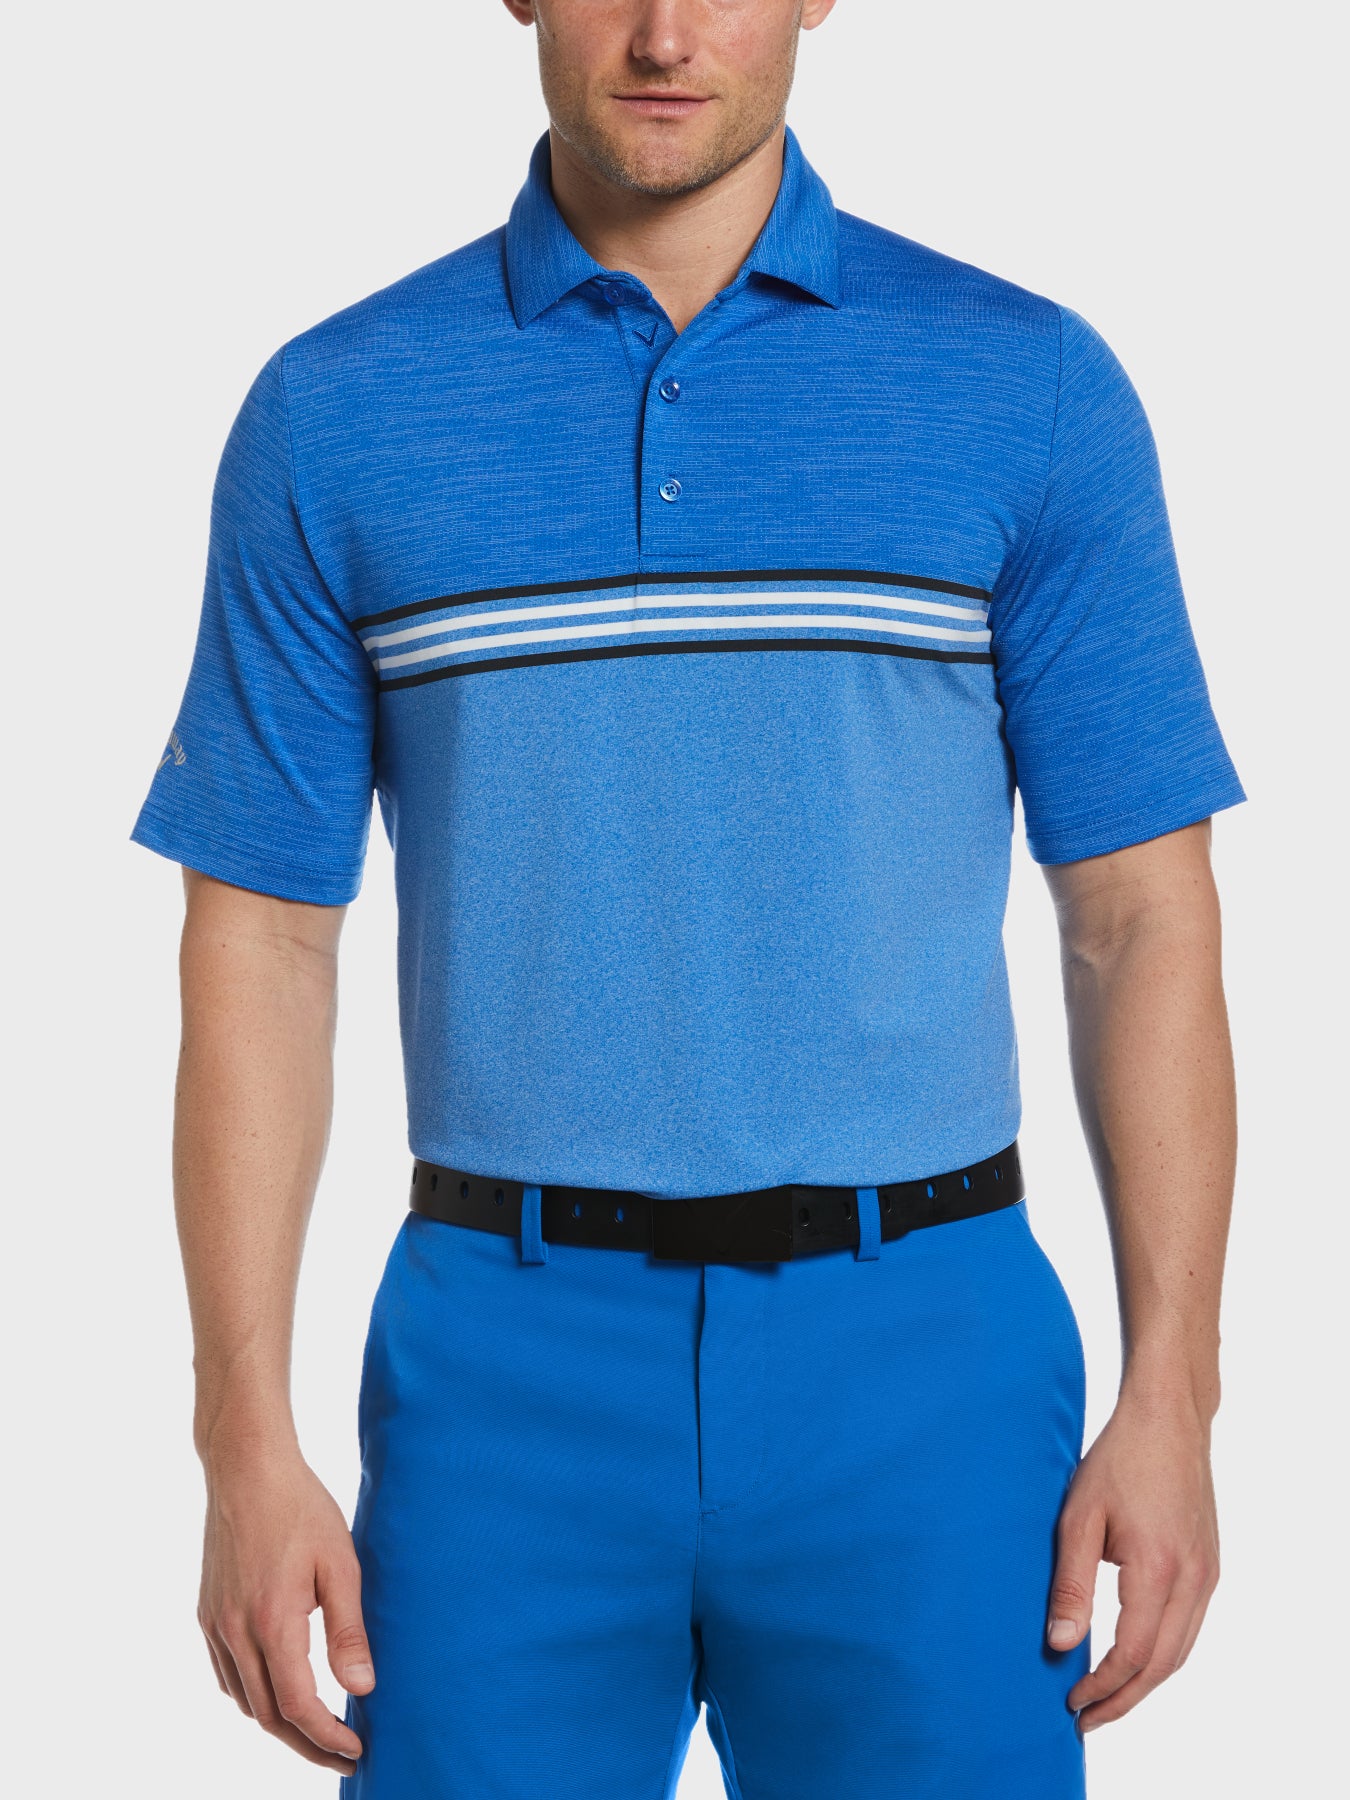 View Heathered Chest Stripe Polo In Magnetic Heather Magnetic Htr S information